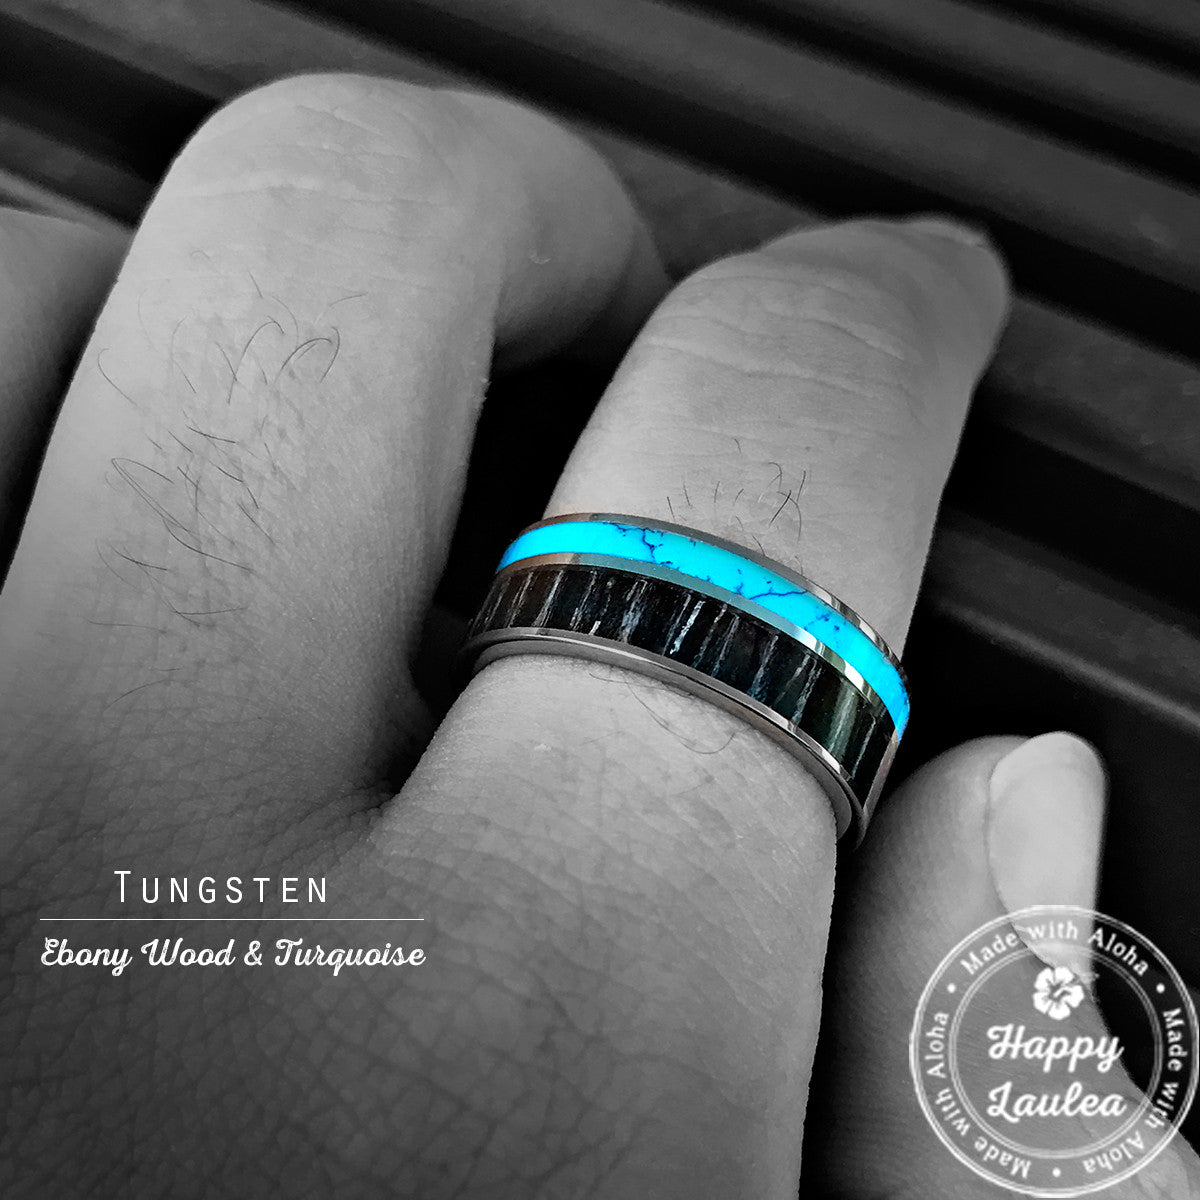 Tungsten Carbide Ring with Ebony Gabon & Aqua Turquoise Inlay - 8mm, Flat Shape, Comfort Fitment (DISCONTINUED)